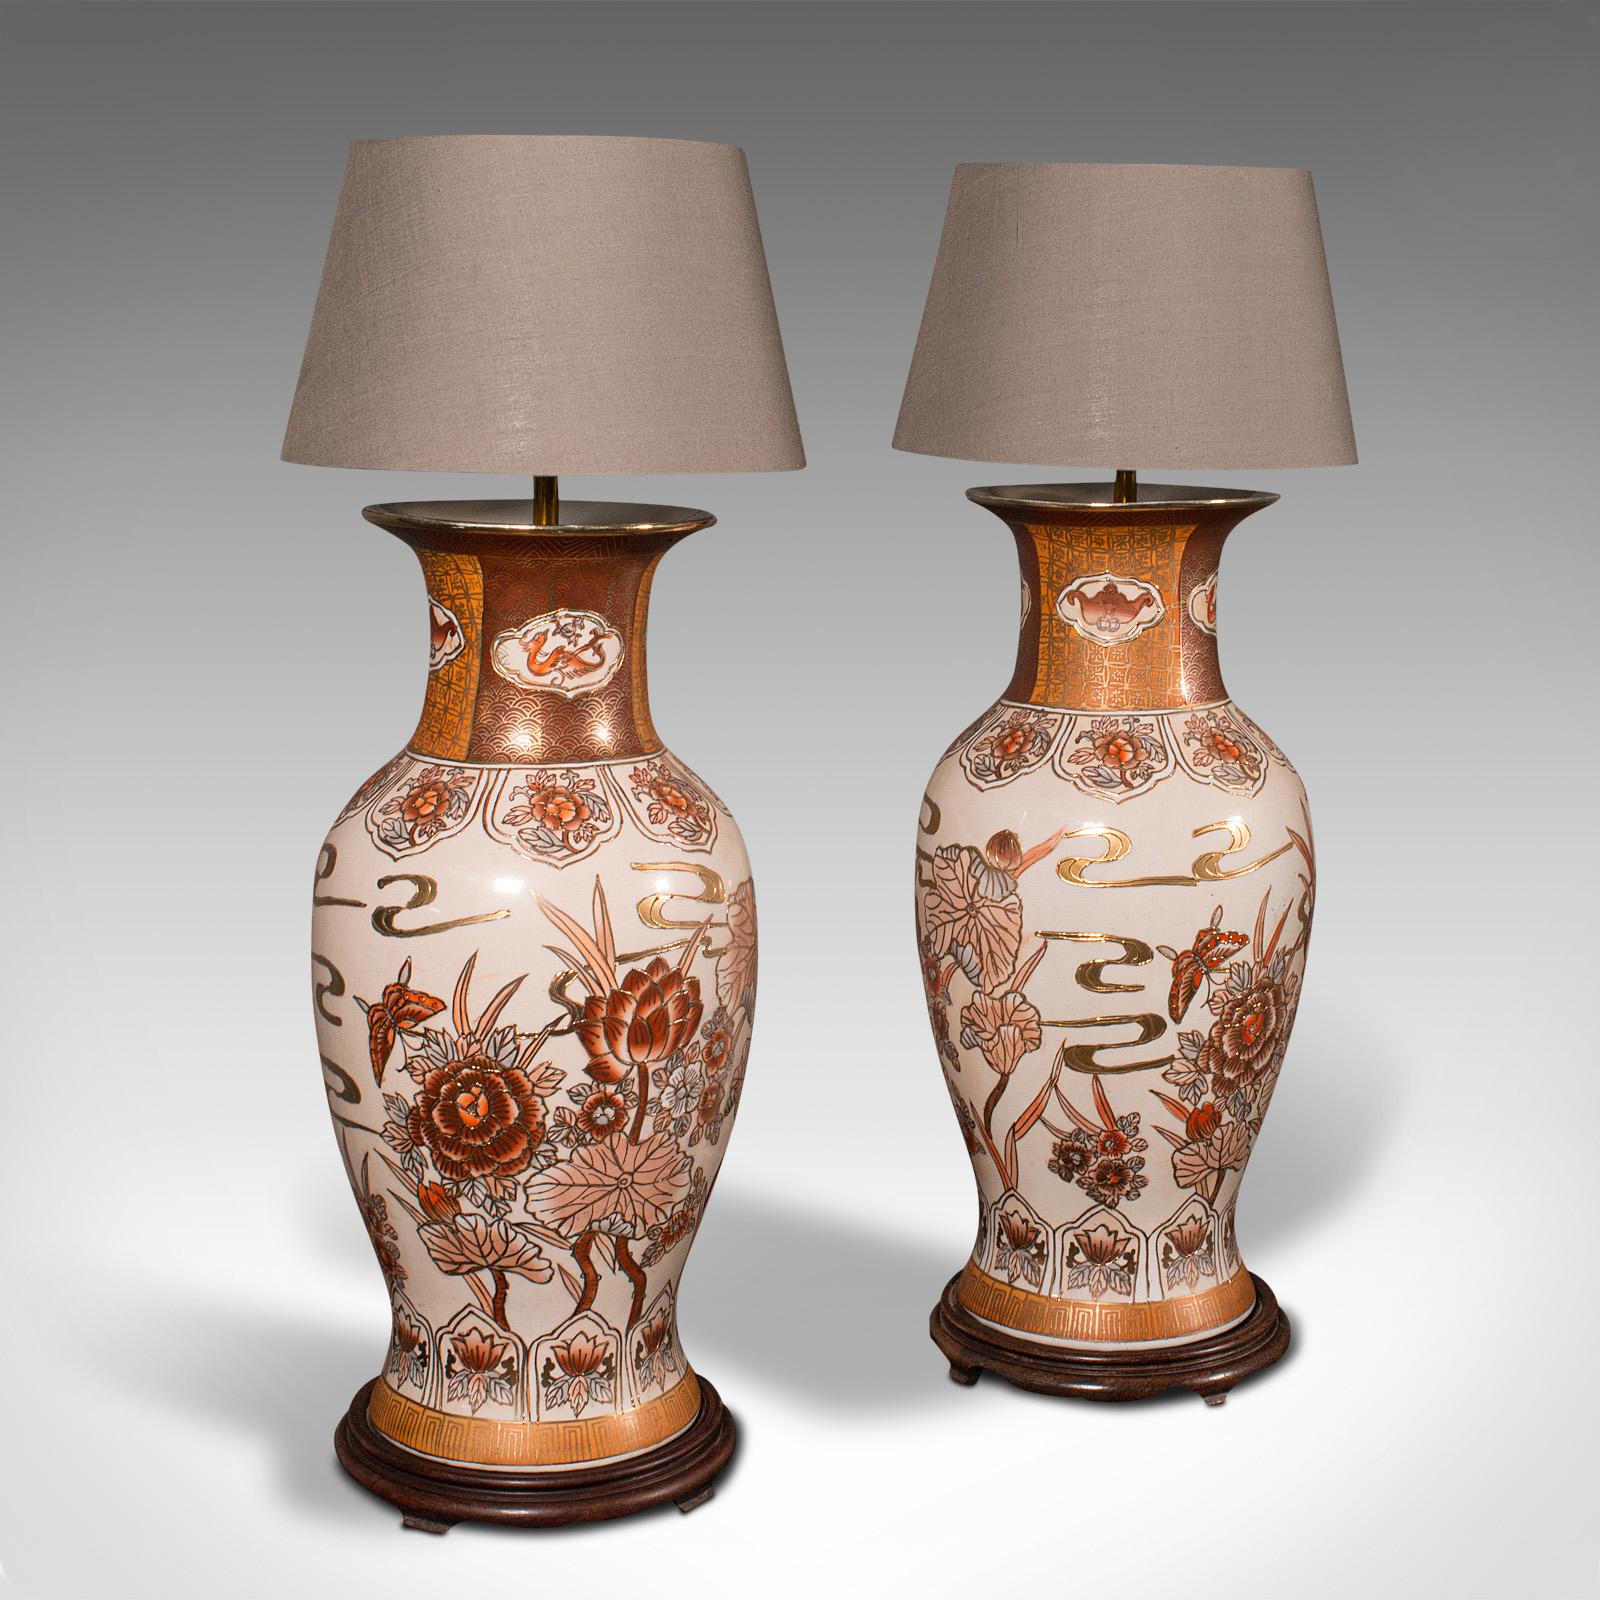 This is a pair of vintage table lamps. A Chinese, ceramic decorative light, dating to the late Art Deco period, circa 1940.

Strong deco taste to the foliate detail and mellow colours
Displays a desirable aged patina and in good order
Blush pink